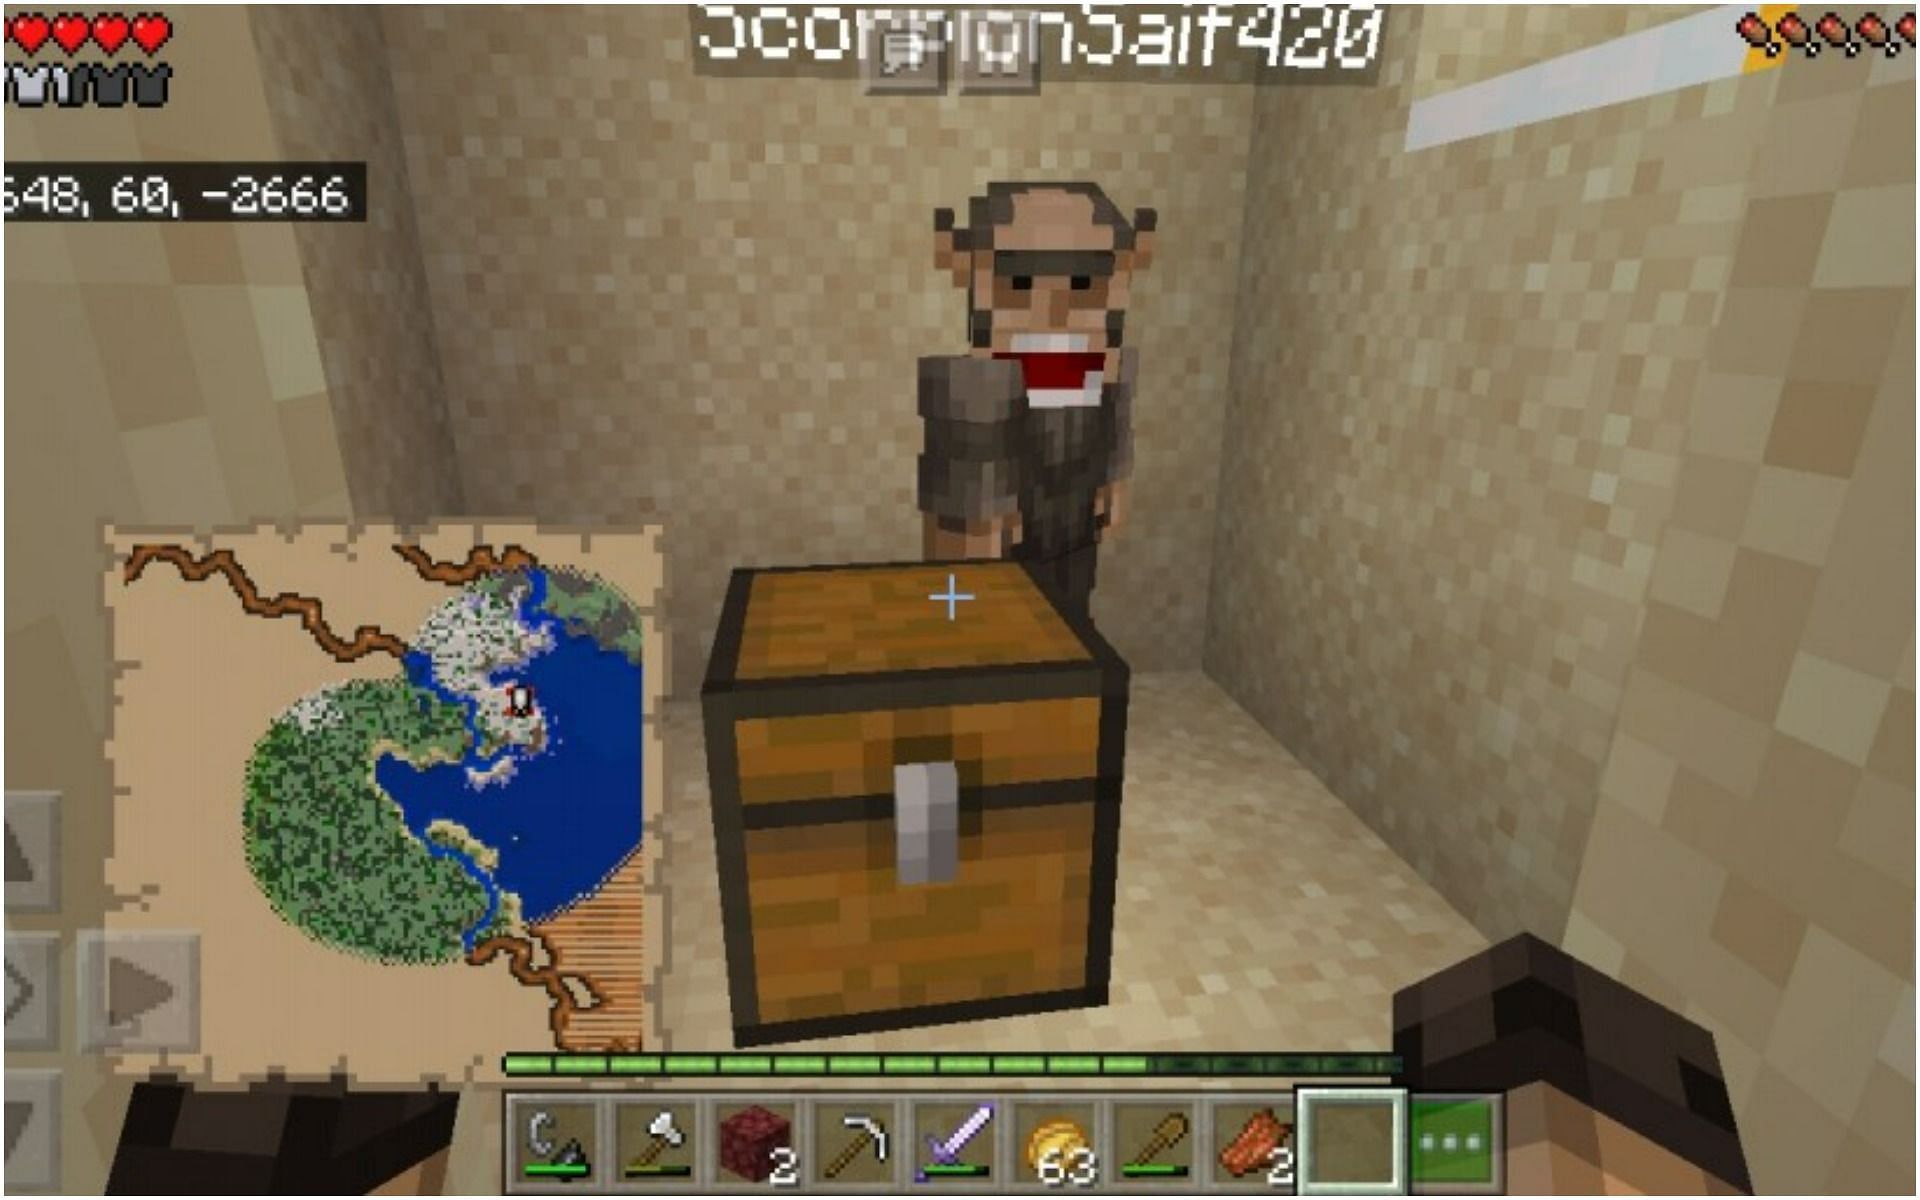 A buried treasure chest being discovered (Image via Minecraft)